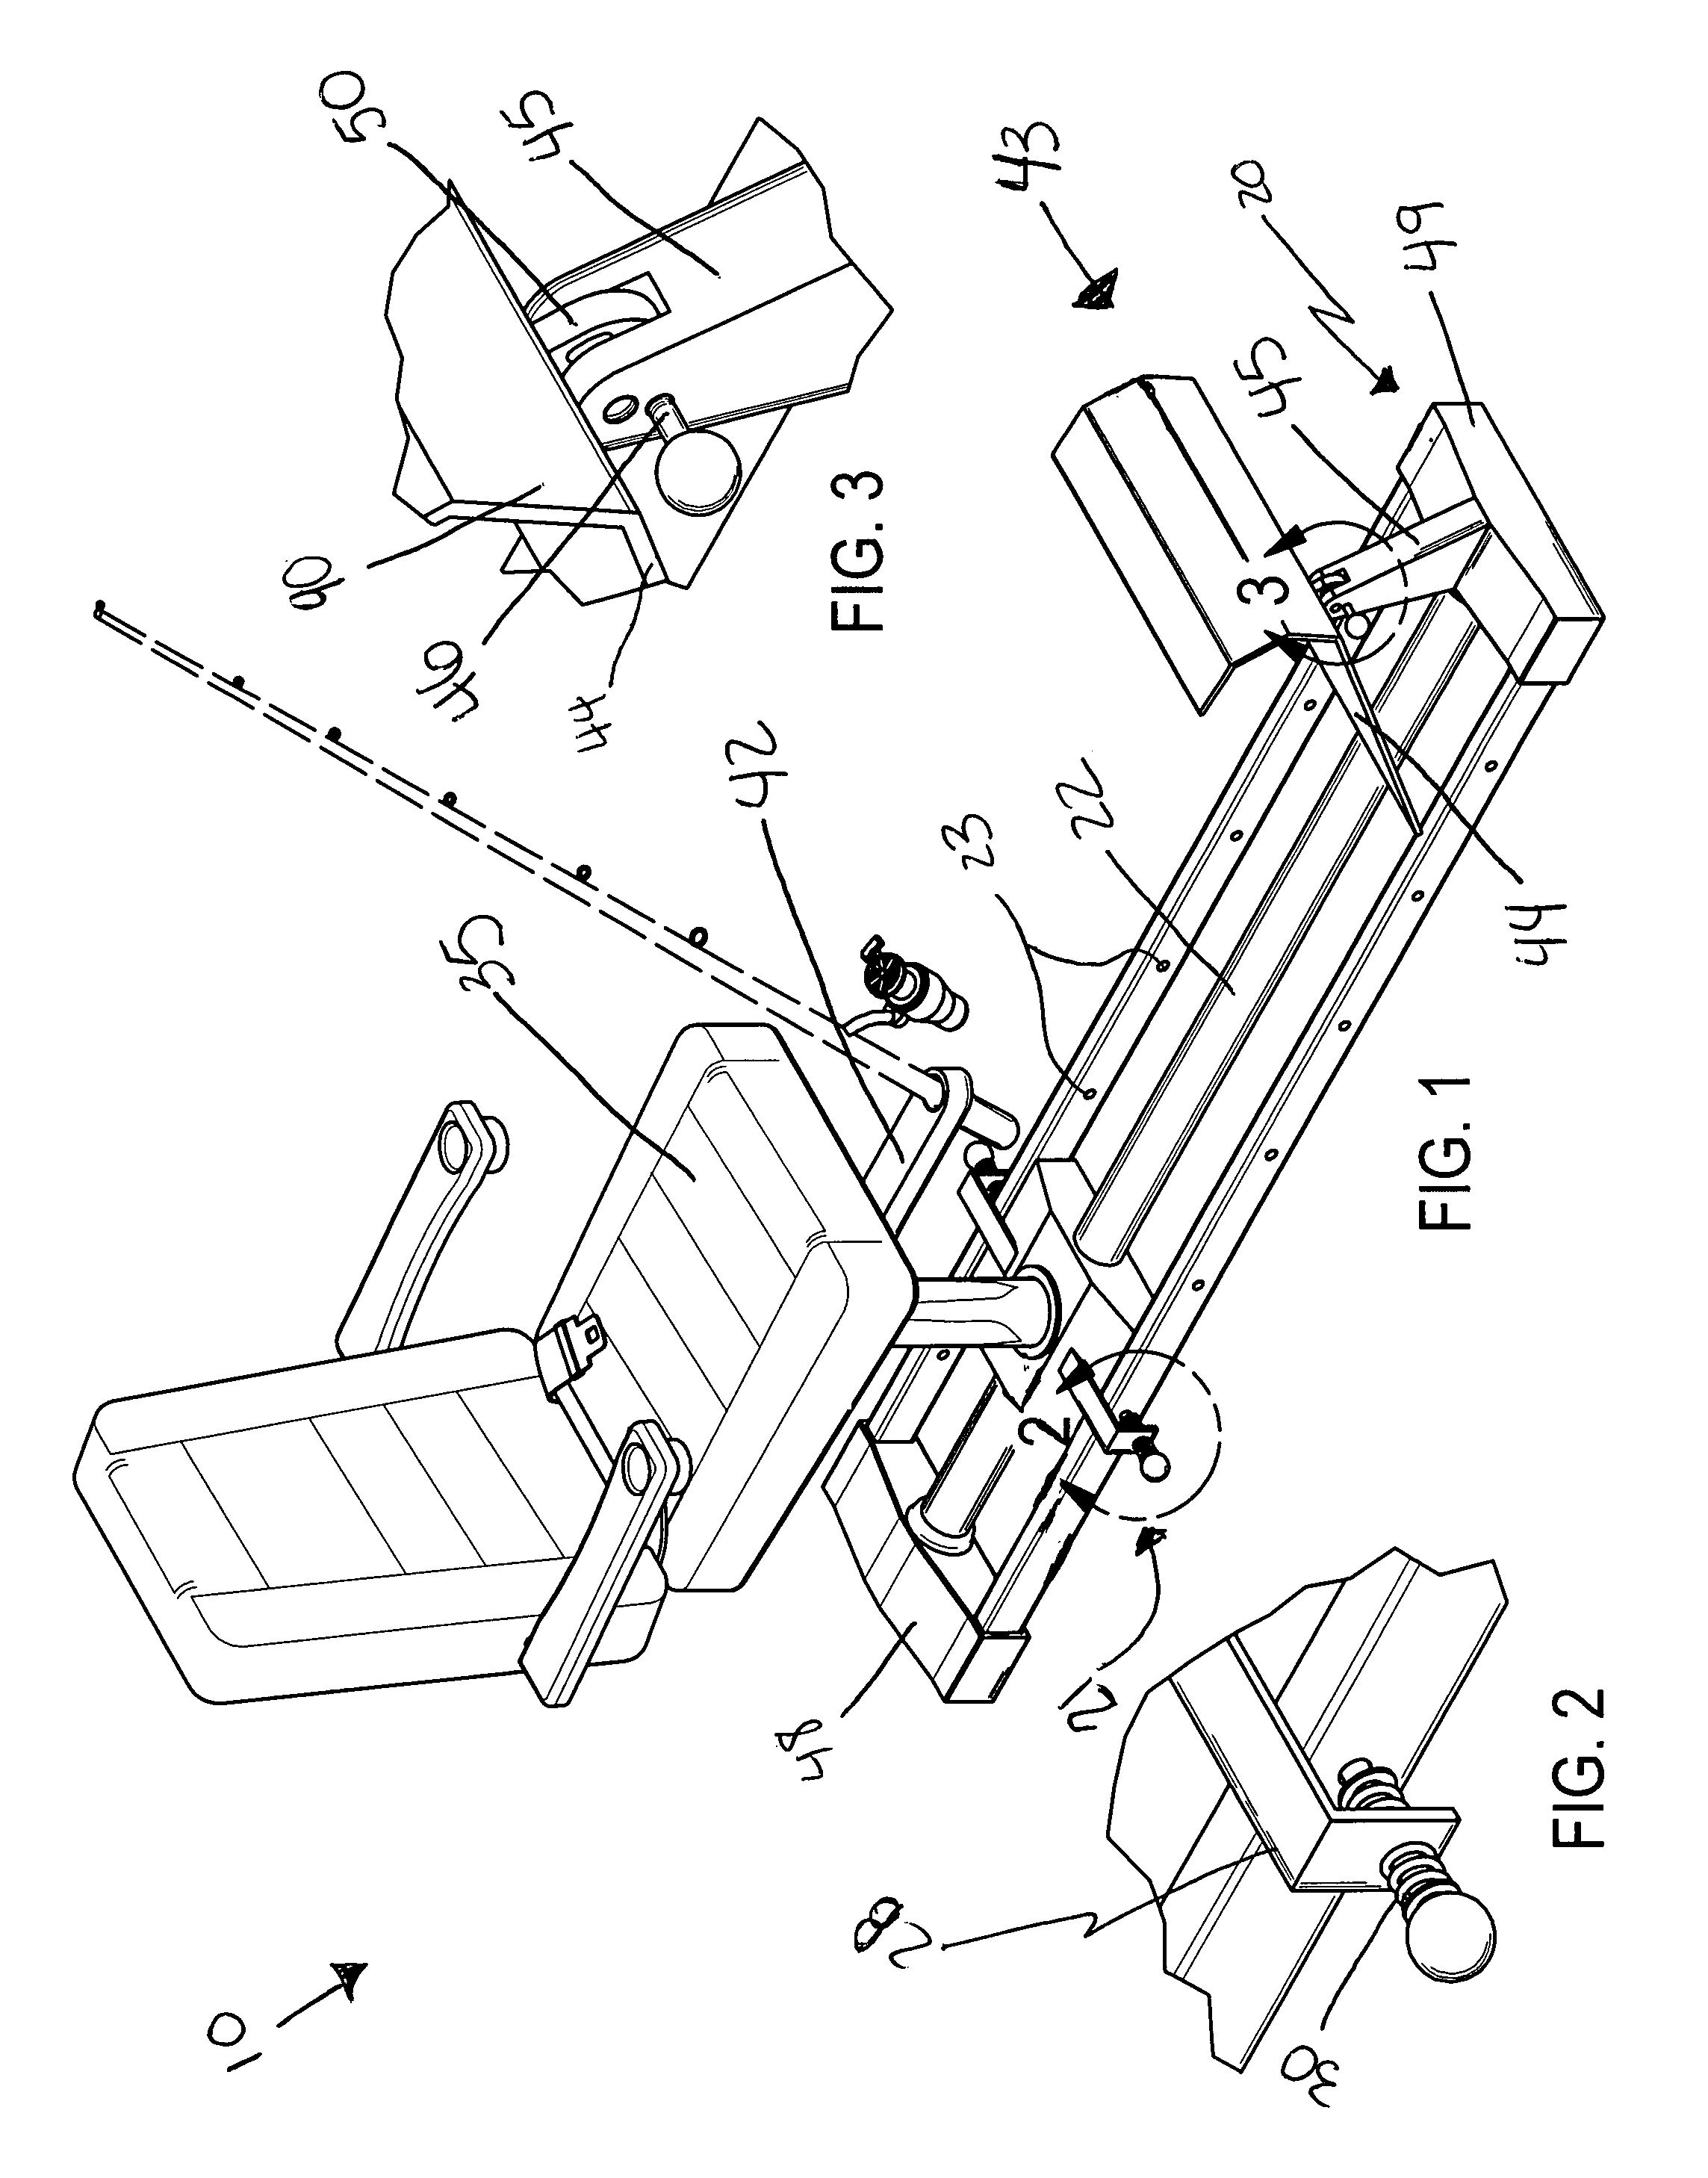 Adjustable fisherman seat assembly and associated method